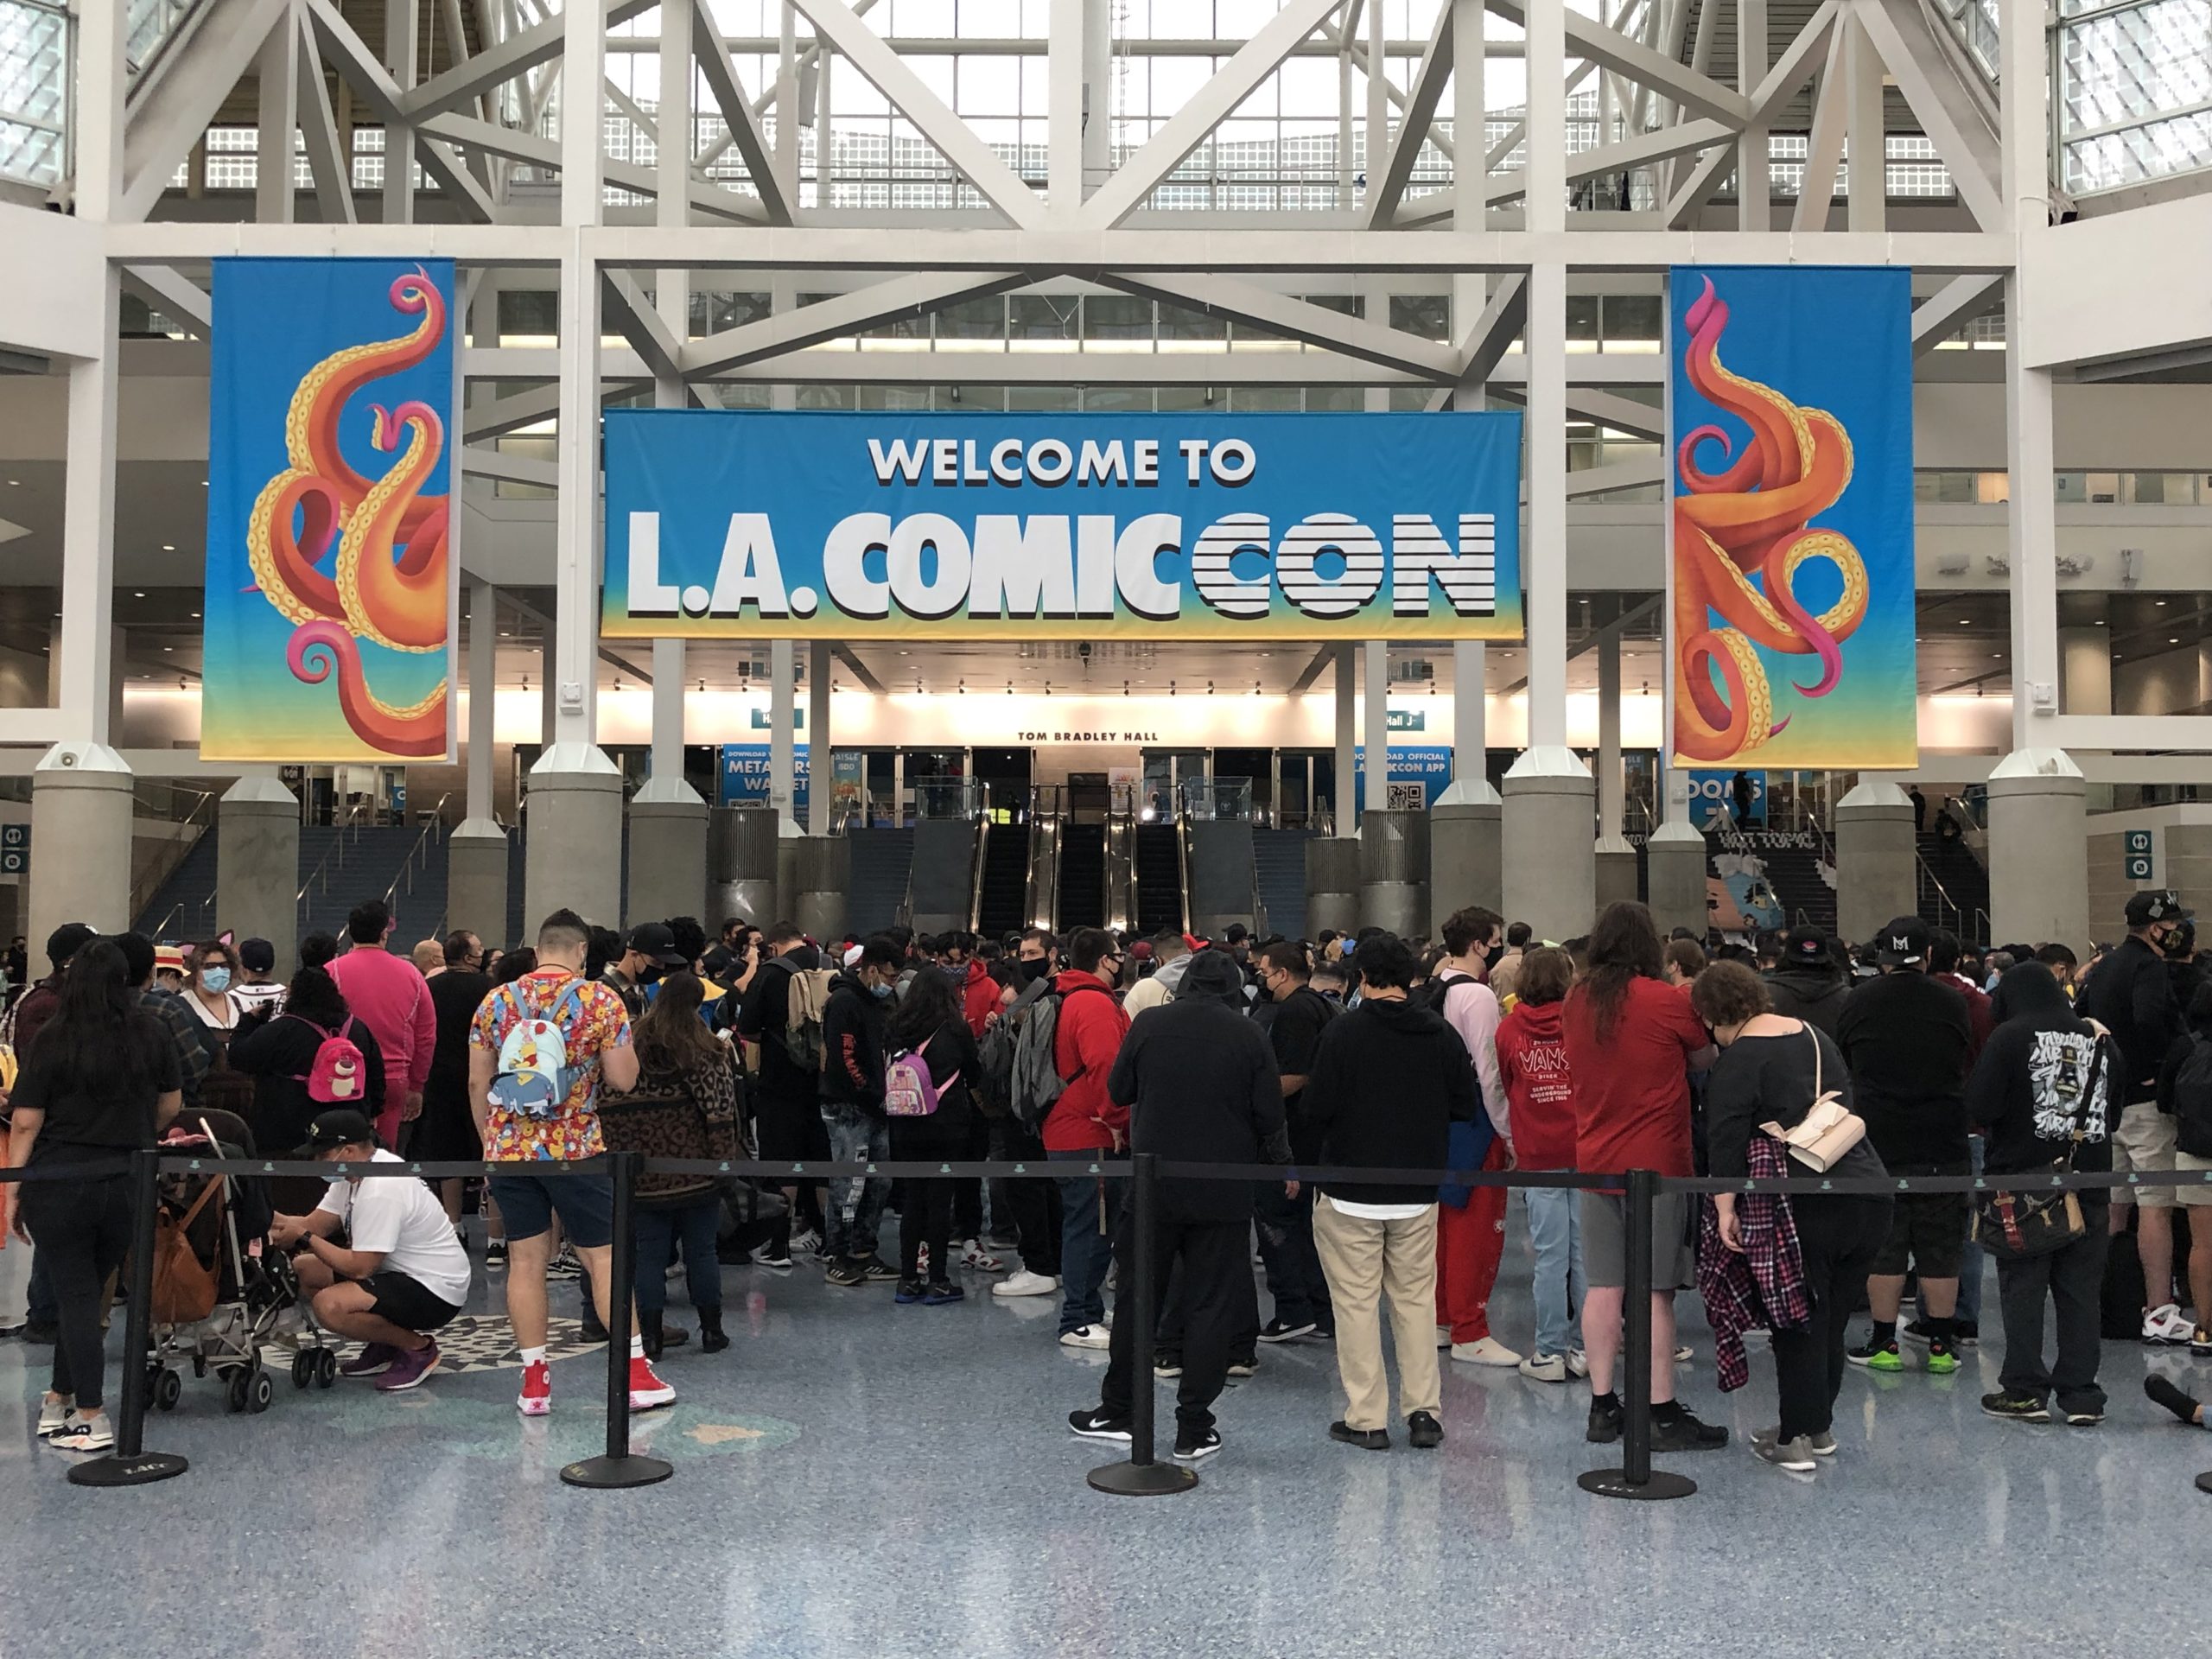 L.A. Comic Con Gears Up For What They Expect To Be Their ‘Largest In History’